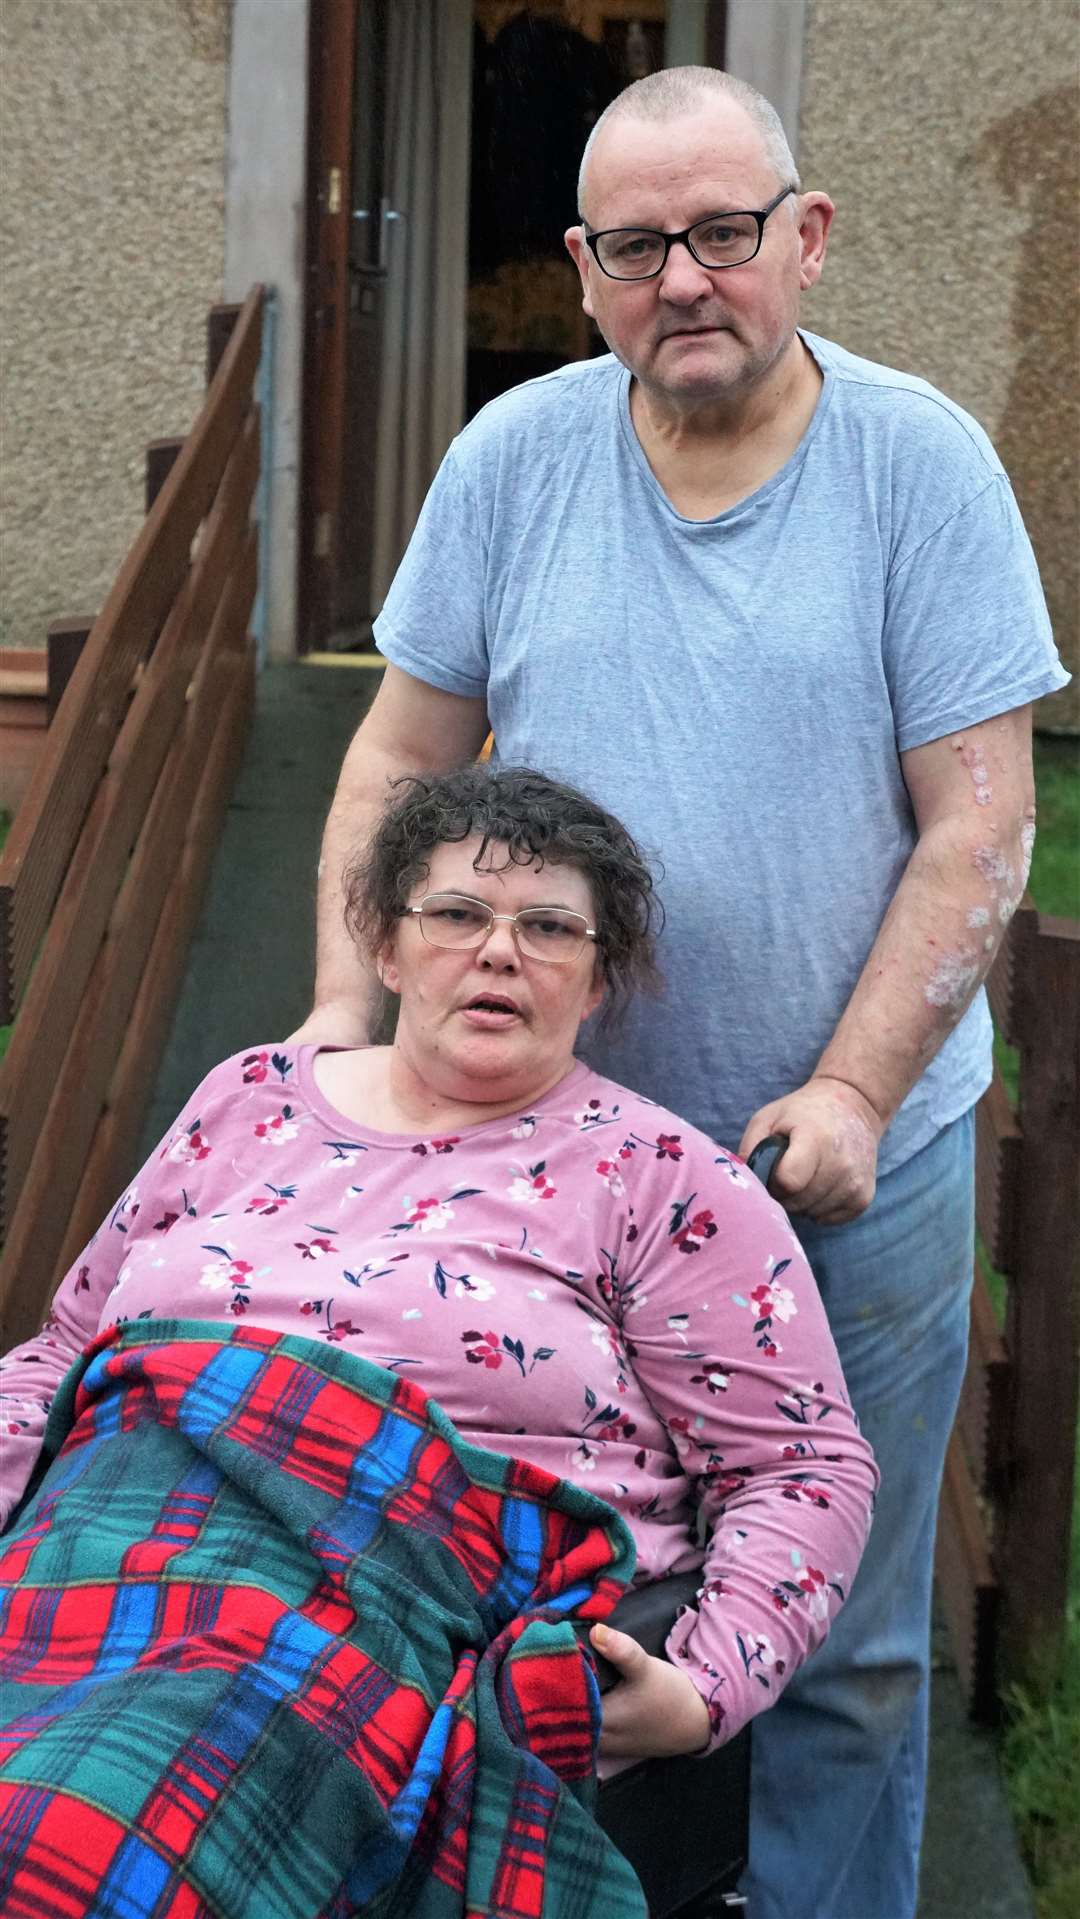 Ronnie is Janet's partner and full-time carer. Picture: DGS